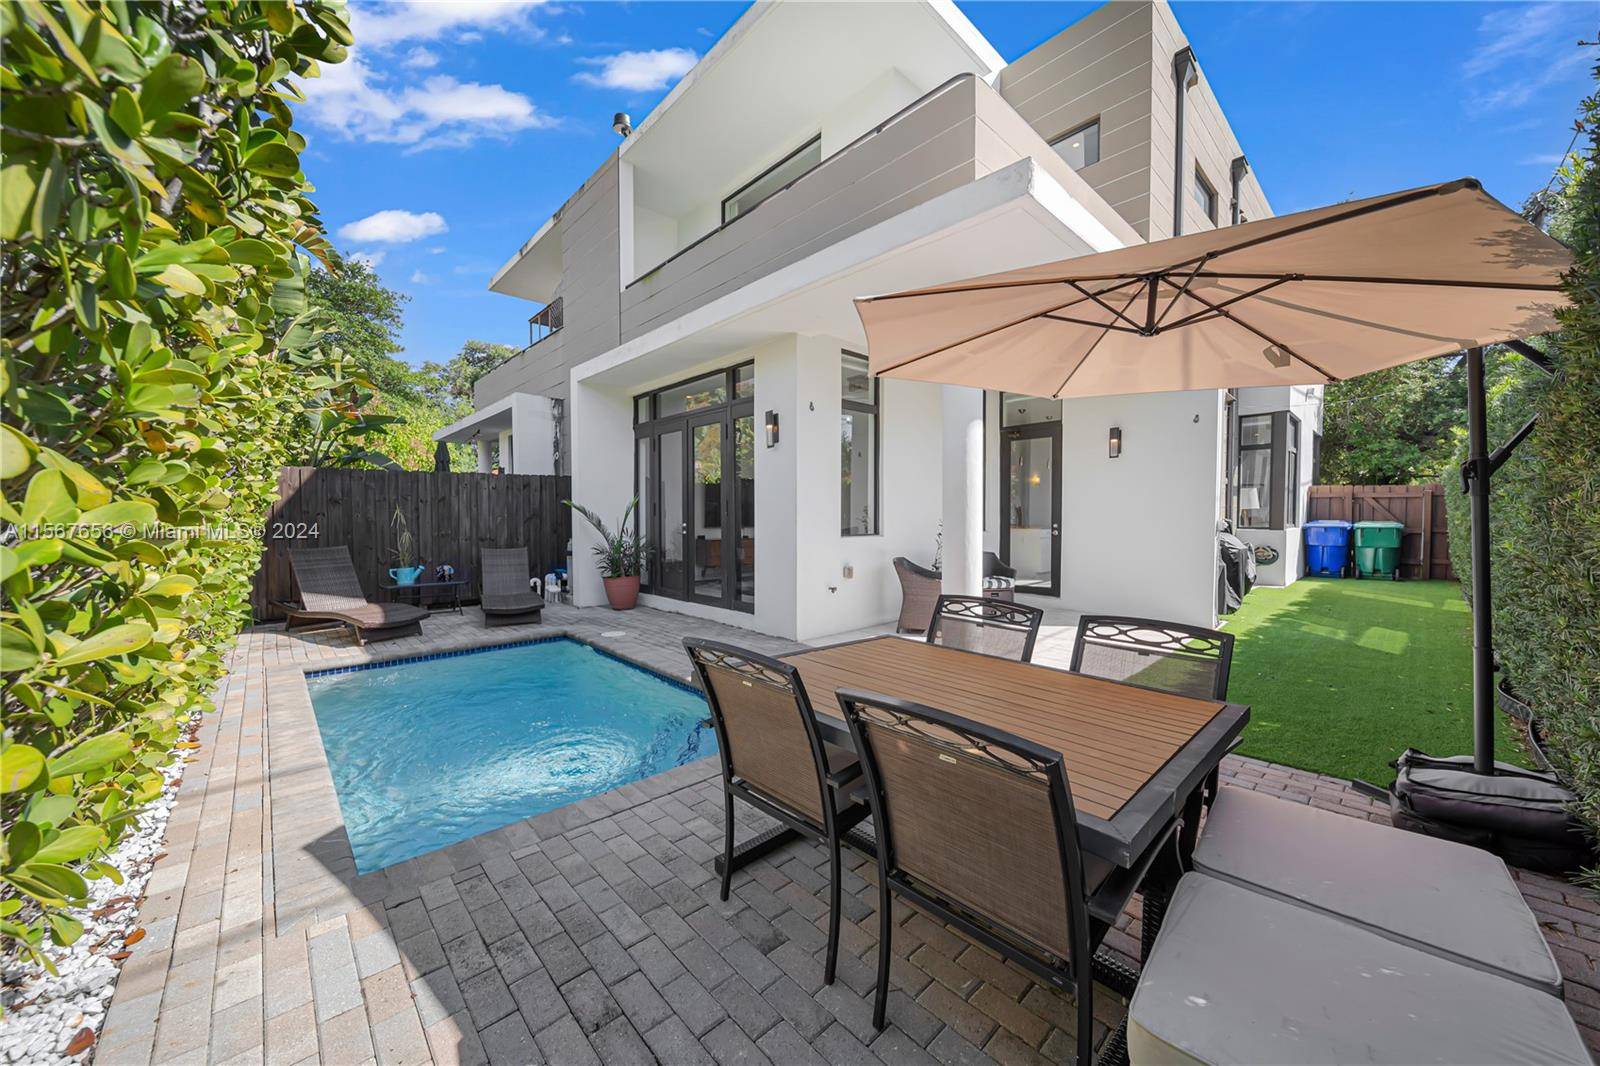 Gorgeous Coconut Grove Home For Those That Appreciate The Beauty of Natural Light Being Walking Distance from Everything You Need Want.